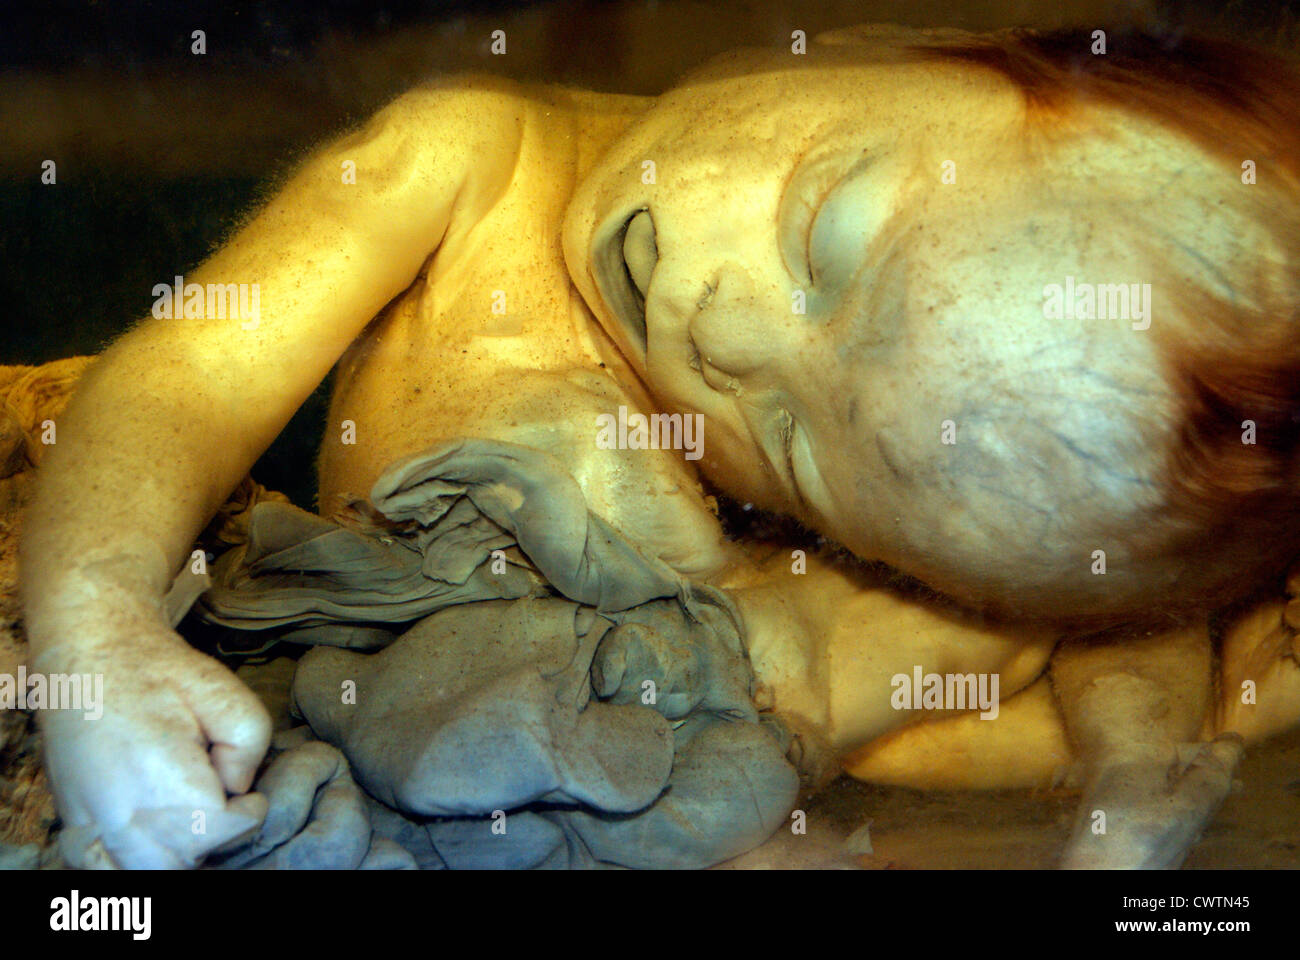 Human Fetus ( Foetus ) in Exomphalos condition preserved in formalin Jar at Medical college hospital India ( original specimen ) Stock Photo